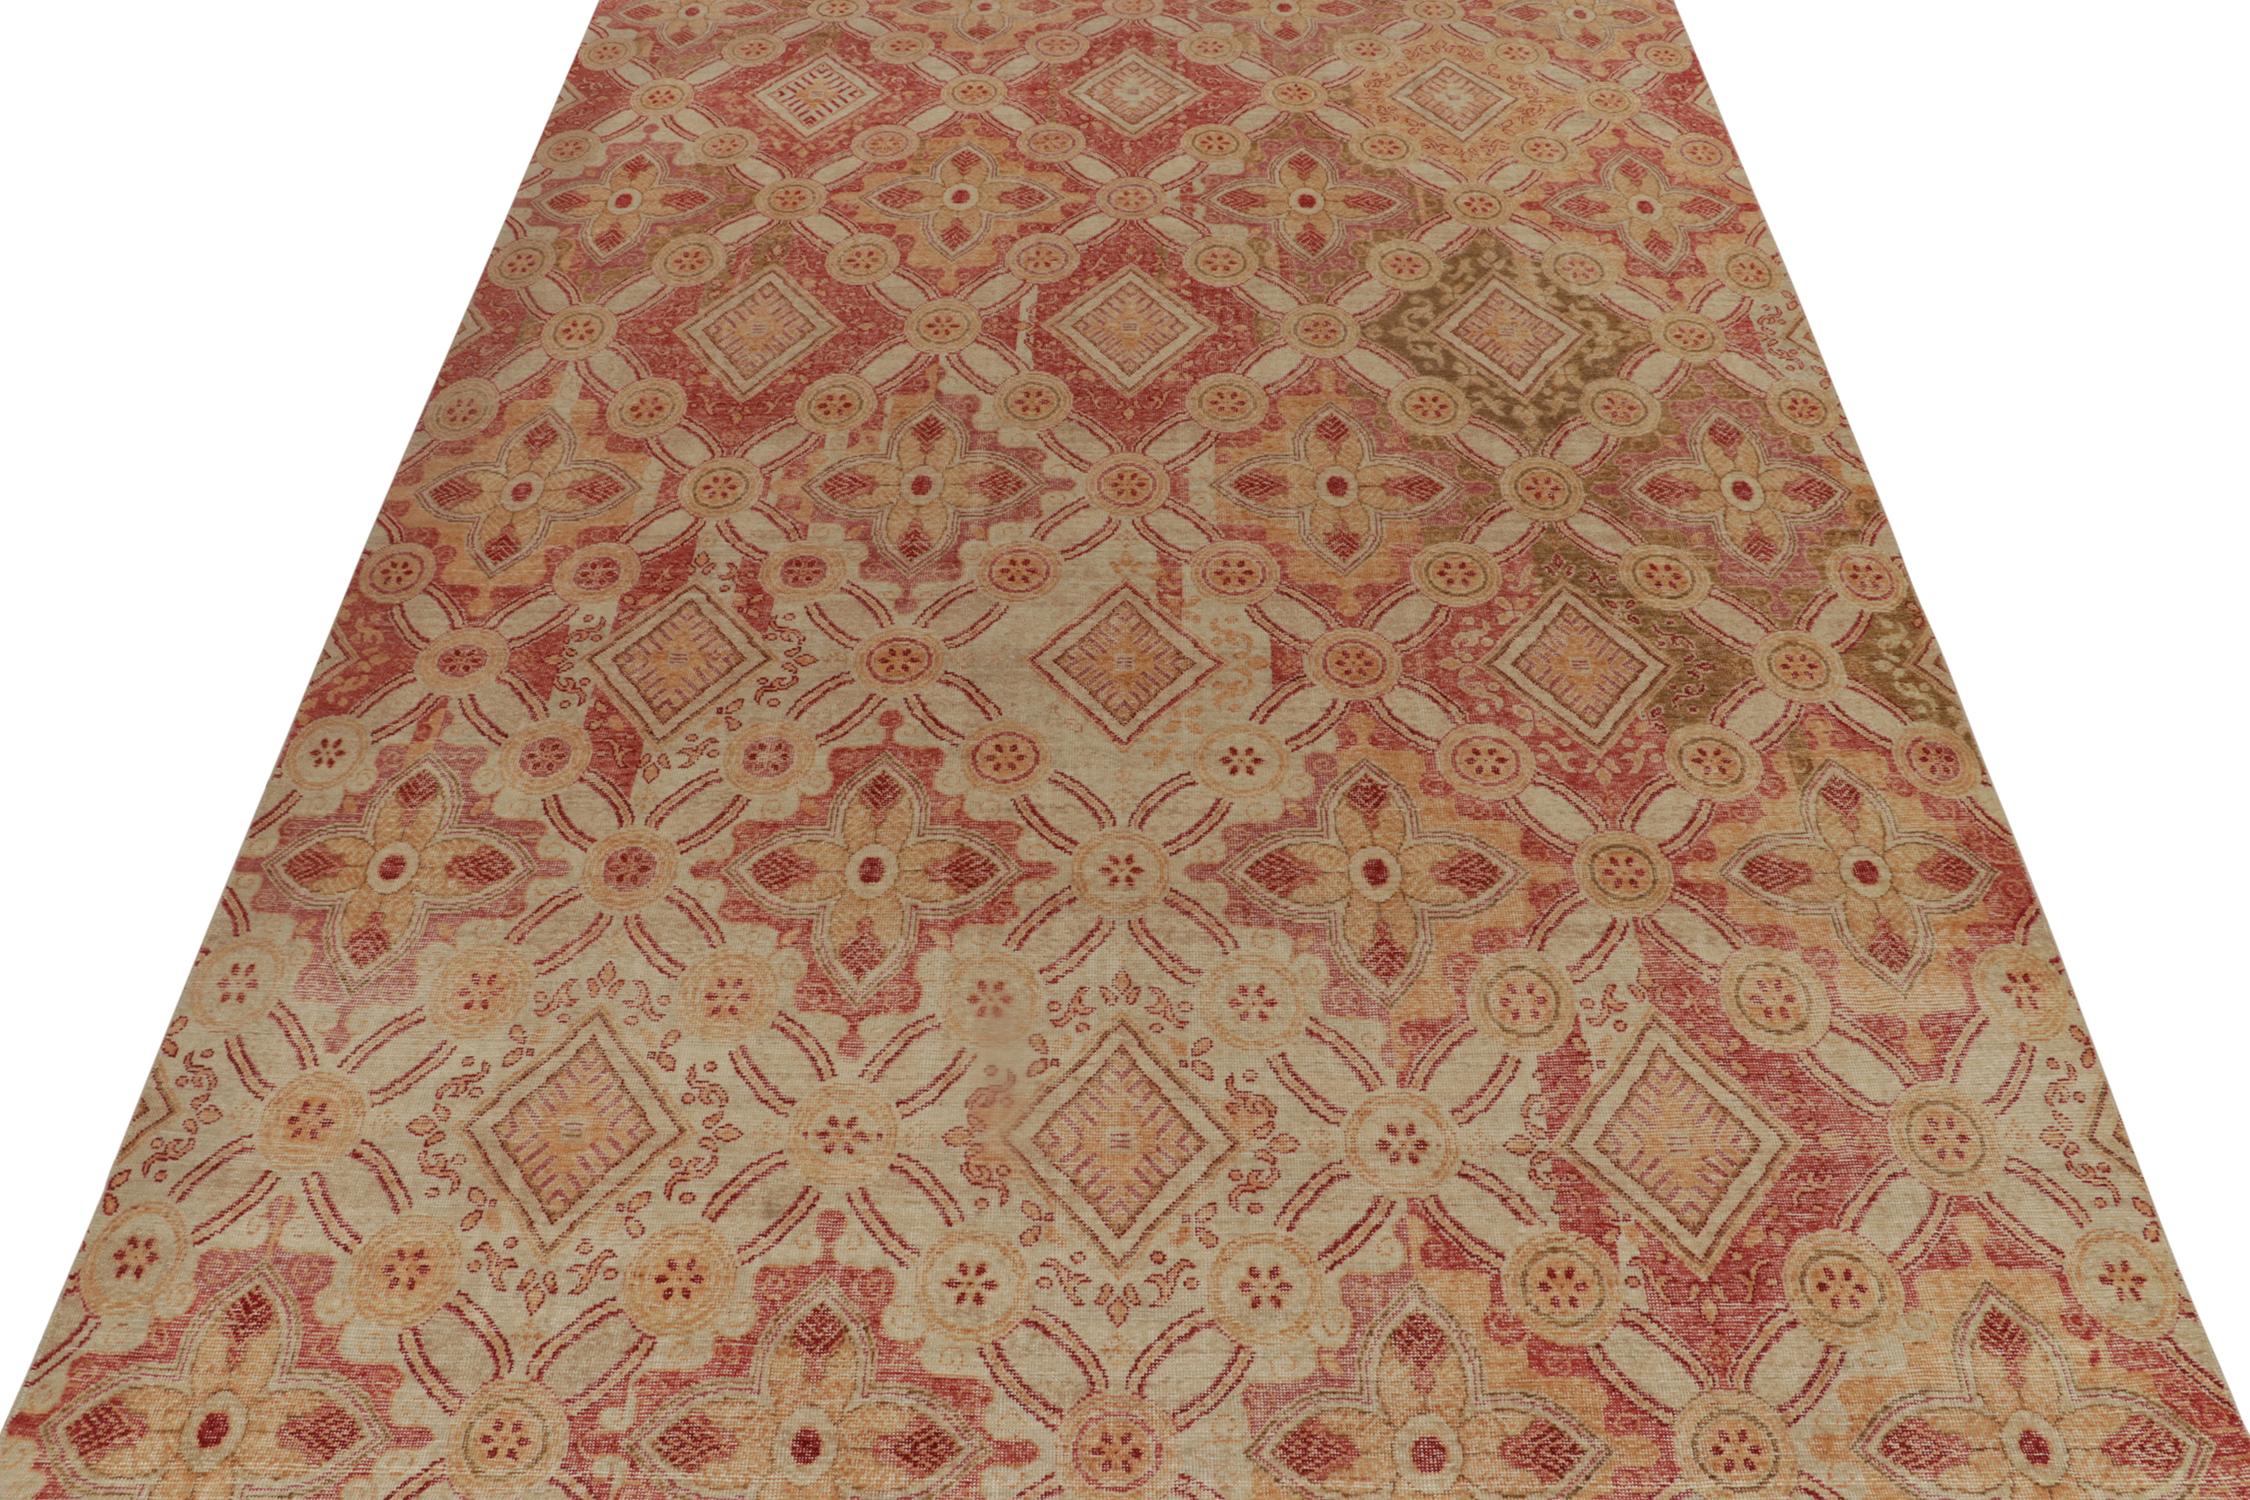 Other Rug & Kilim’s Distressed Style Rug in Red, Gold and Beige-Brown Trellises For Sale